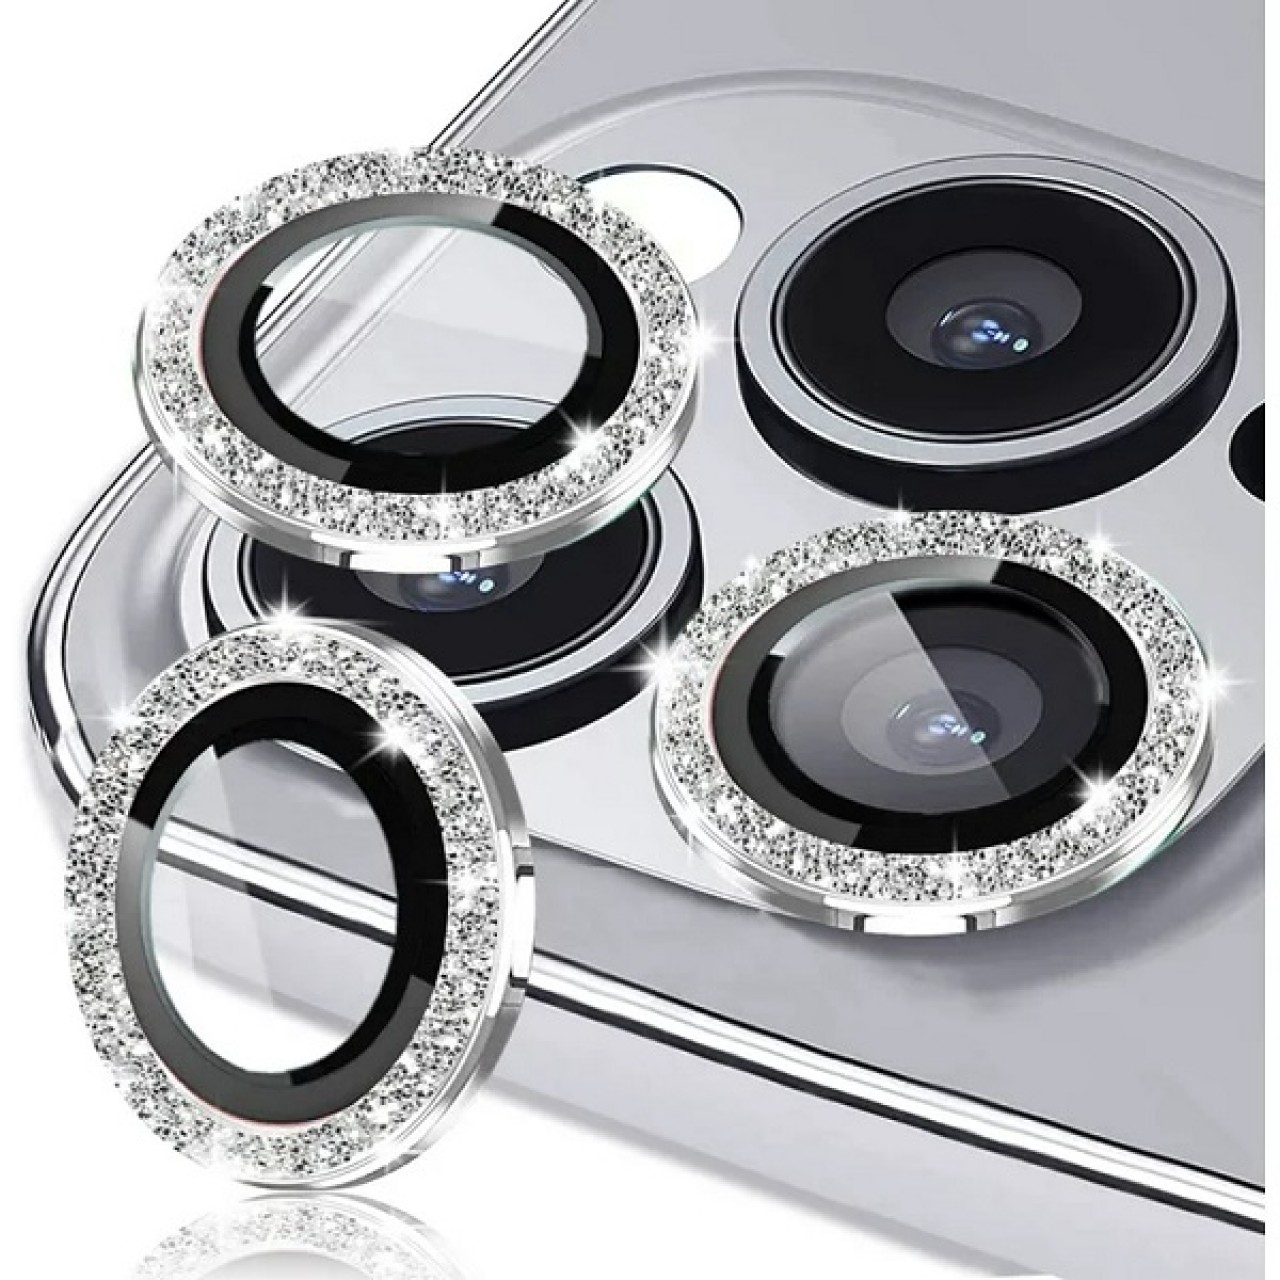 iPhone 12 Mini Προστασία Κάμερας Ασημί Strass - Camera Protector Ring Strass Silver